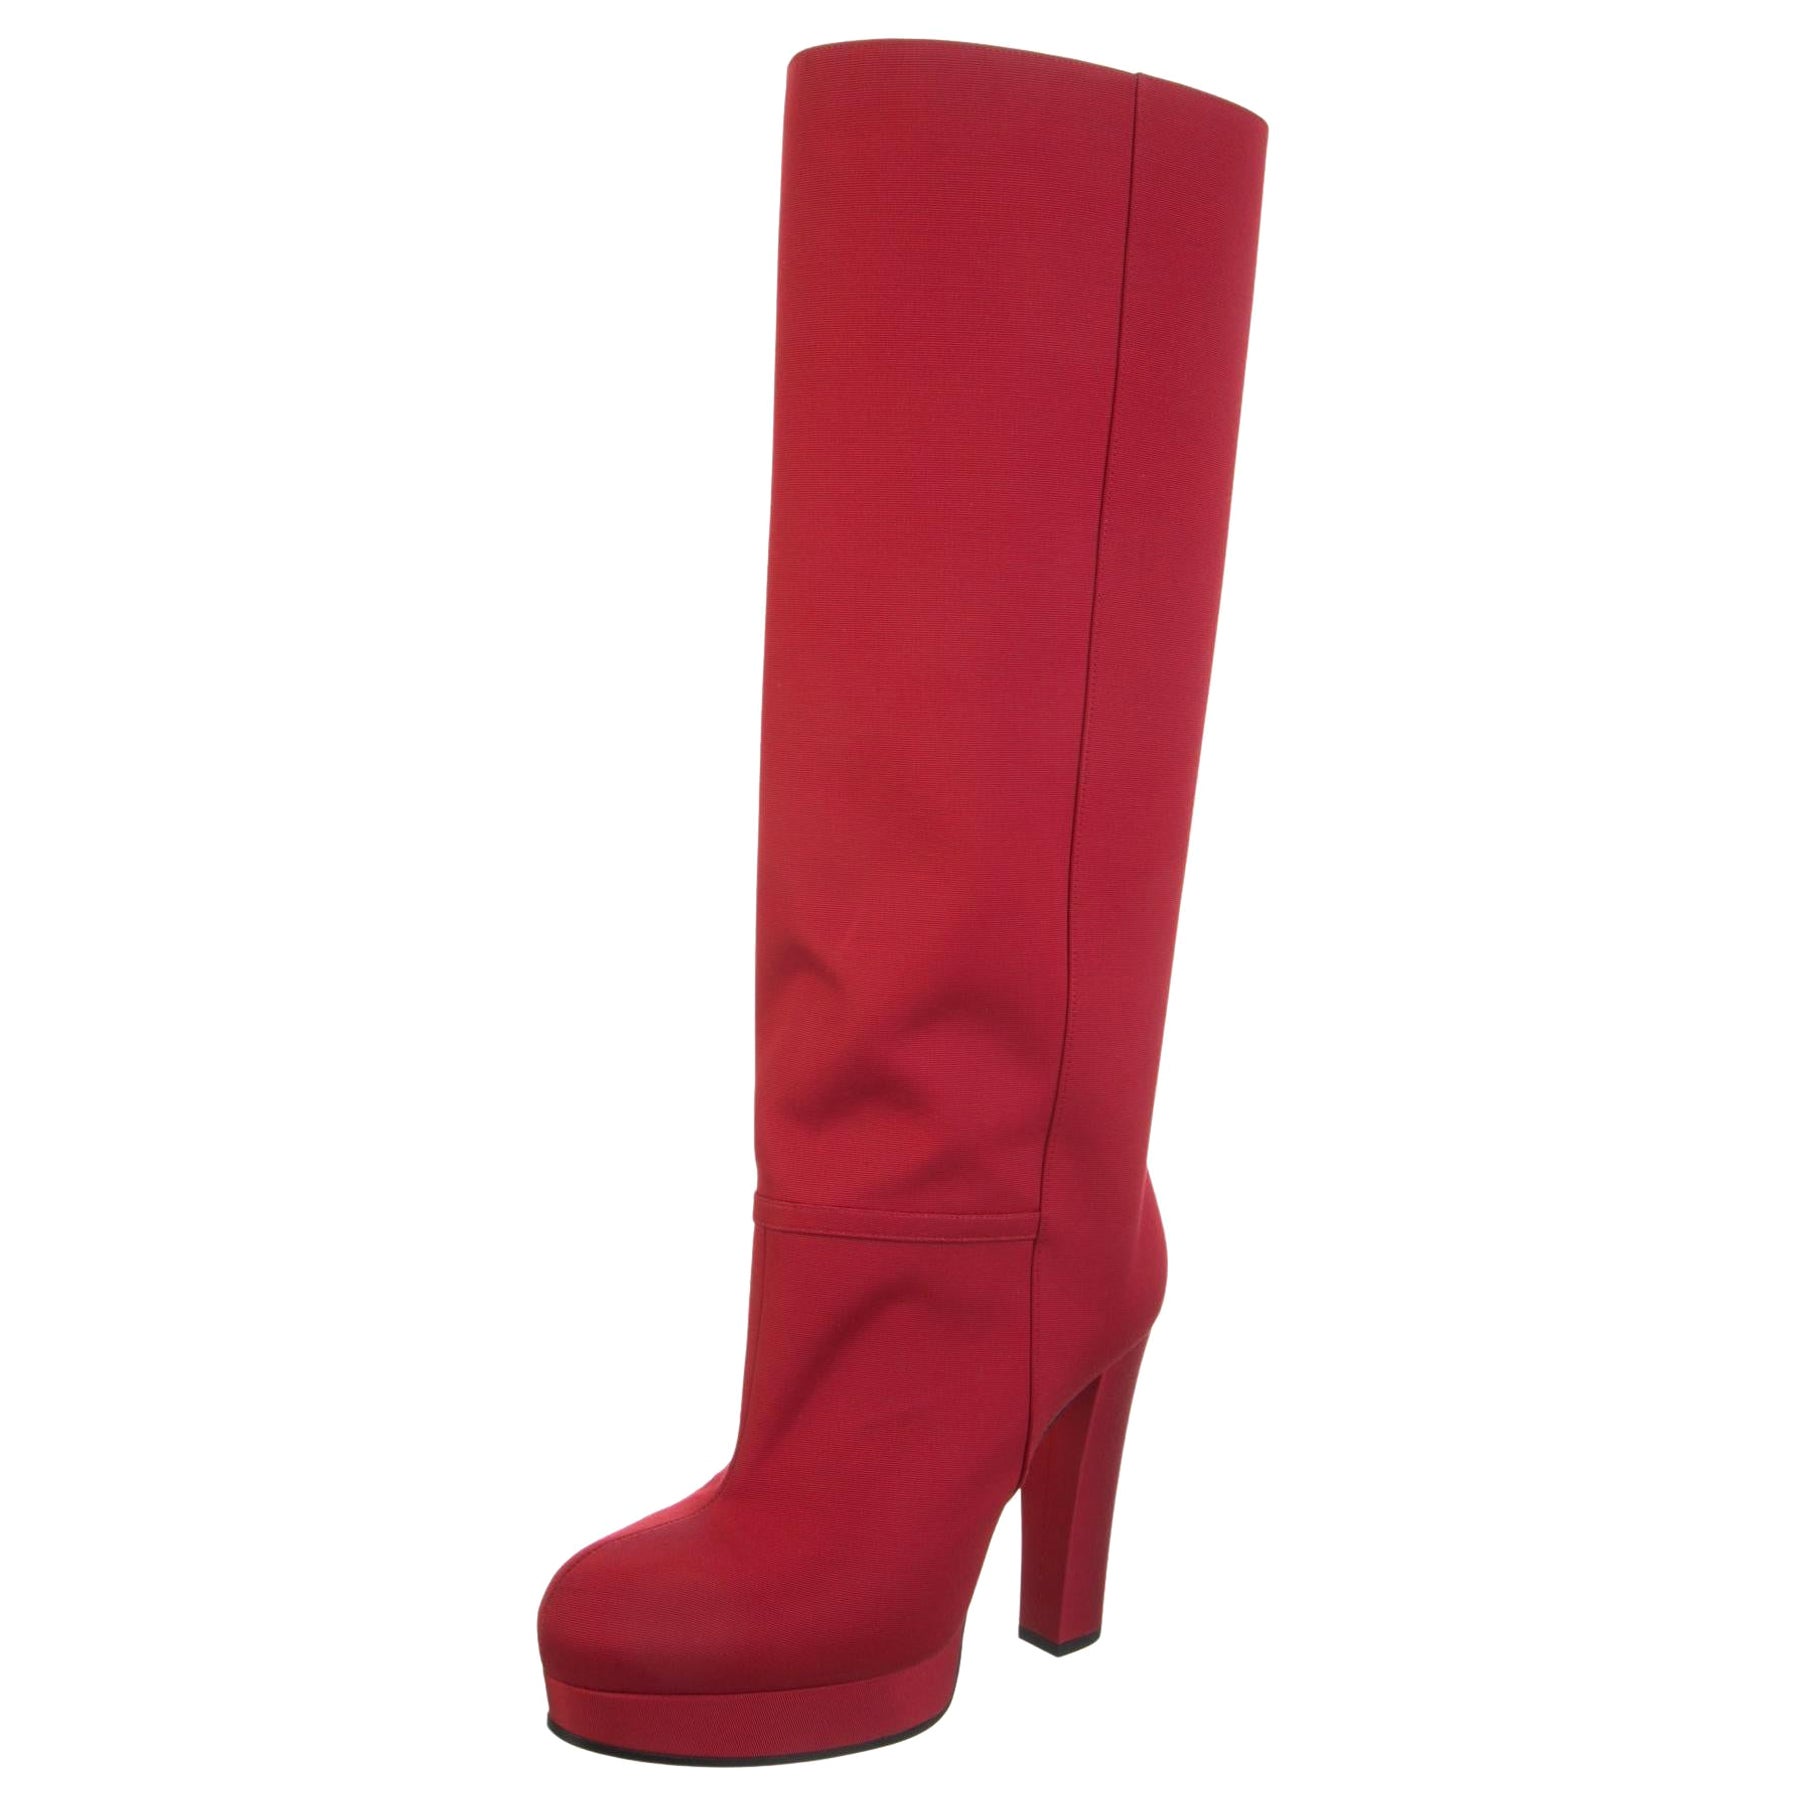 New With Box Gucci Fall 2019 Alessandro Michele Red Boots Sz 36.5